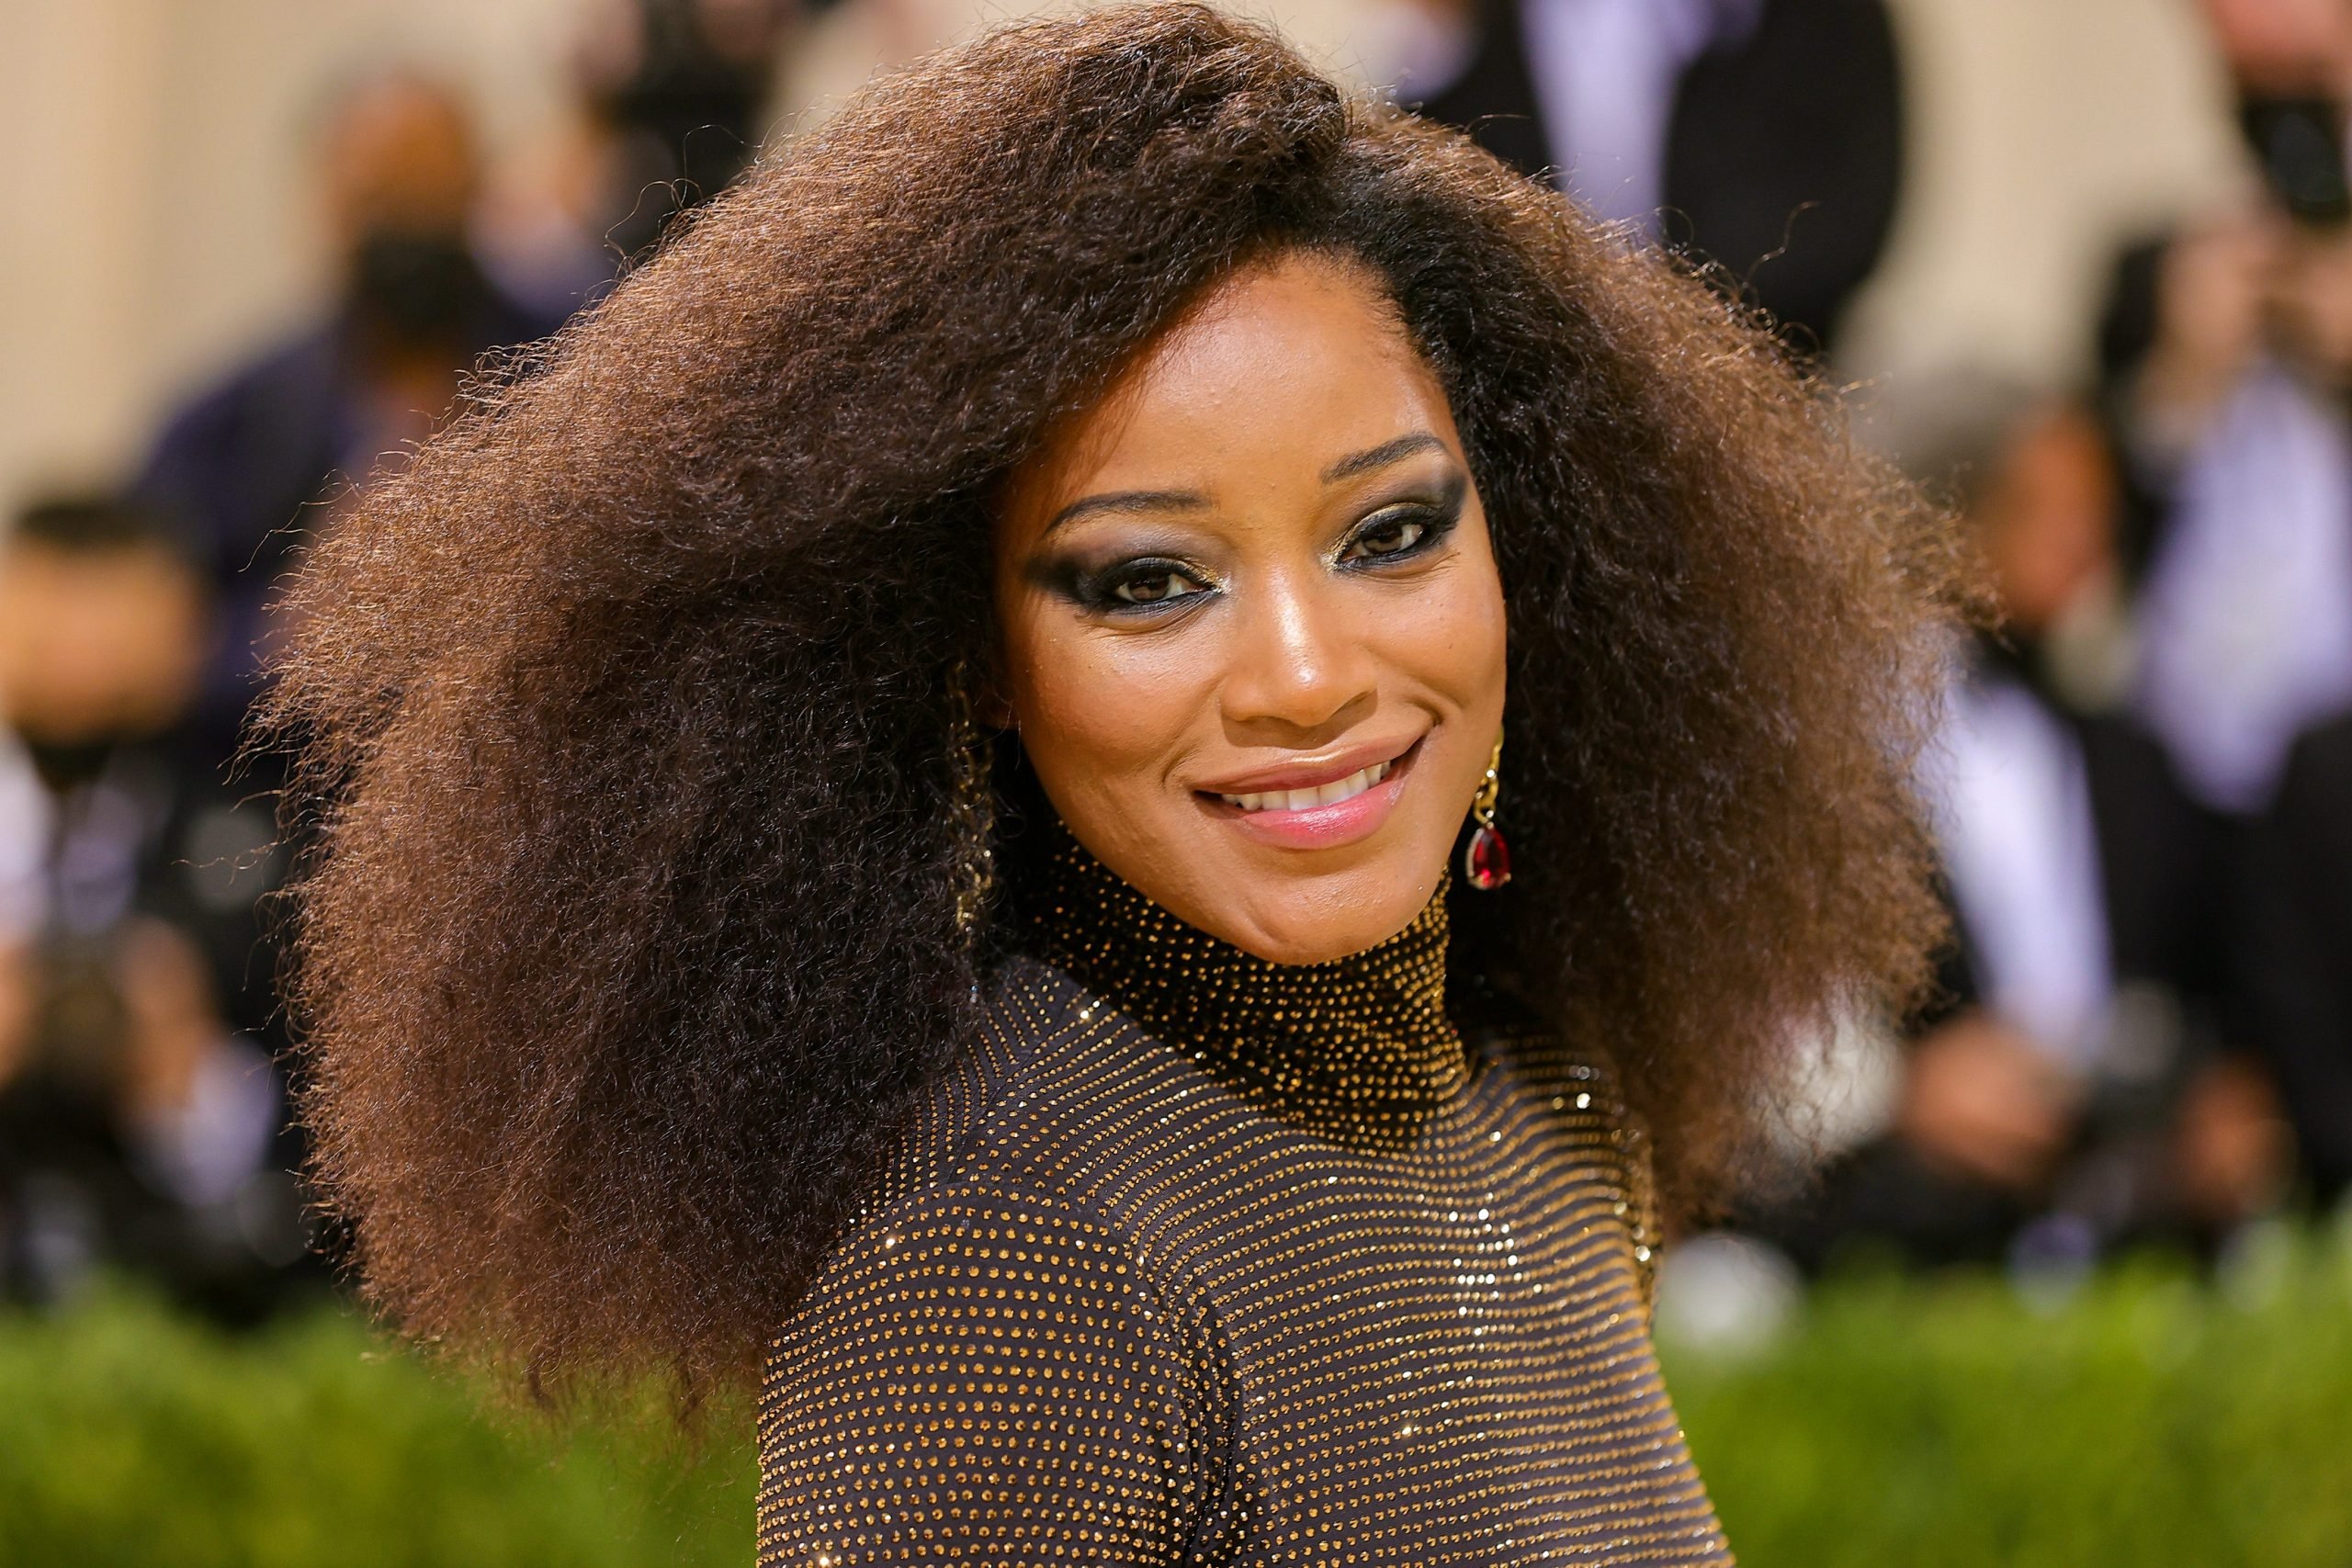 Keke Palmer pictured on the red carpet at the Met Gala 2021.